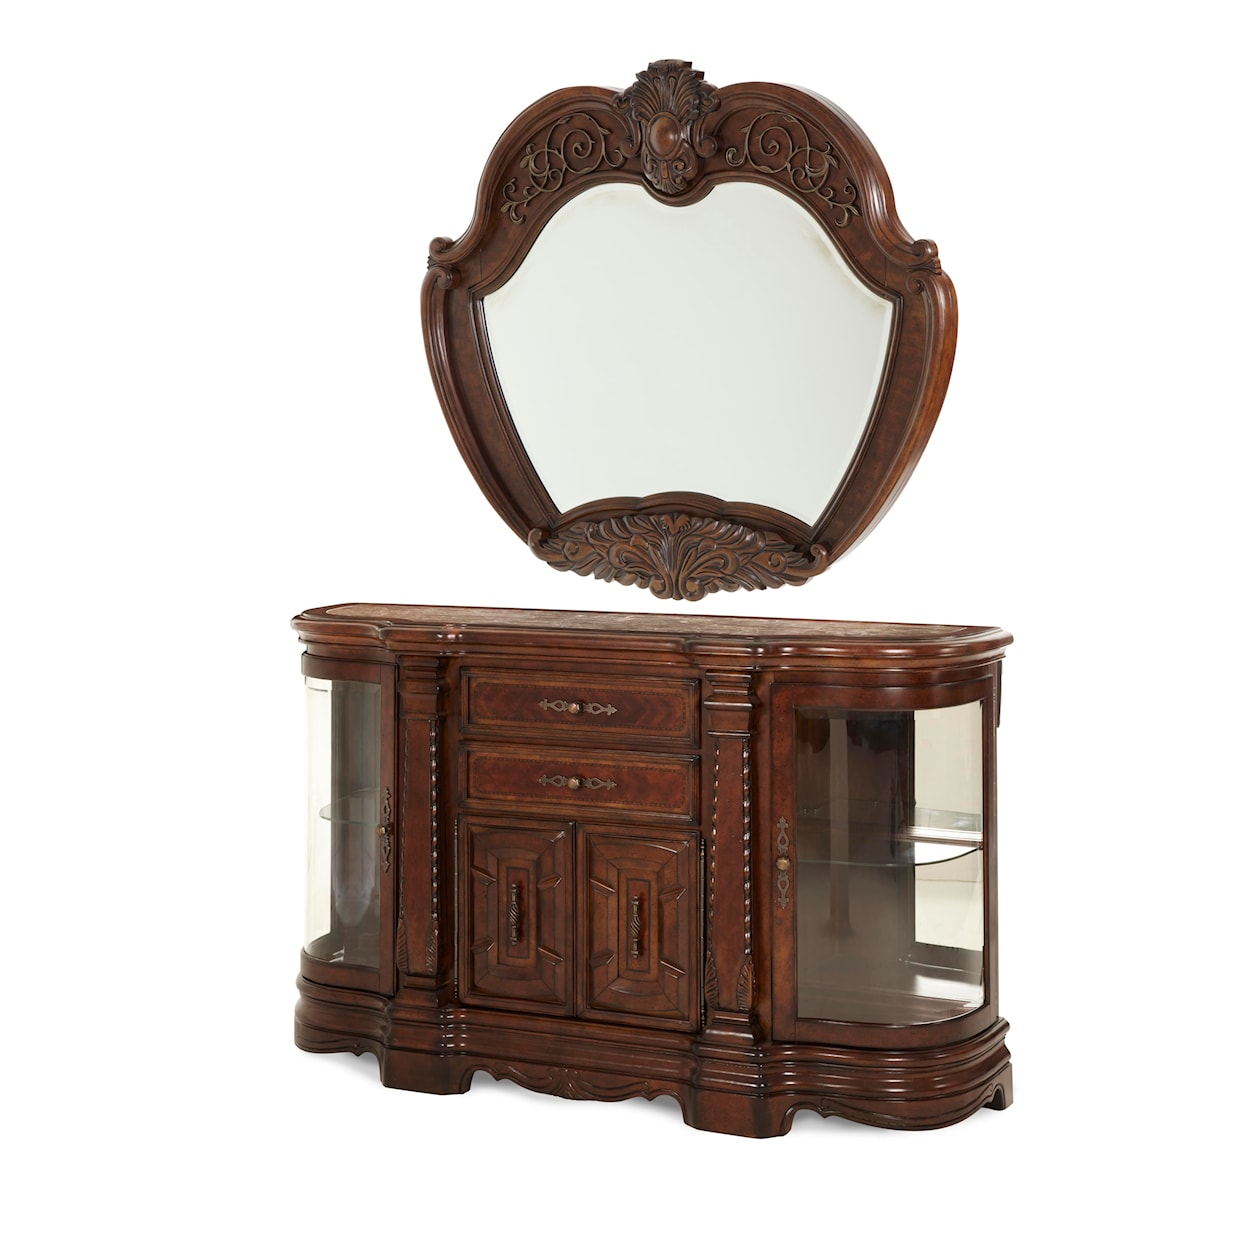 Michael Amini Windsor Court Sideboard with Mirror